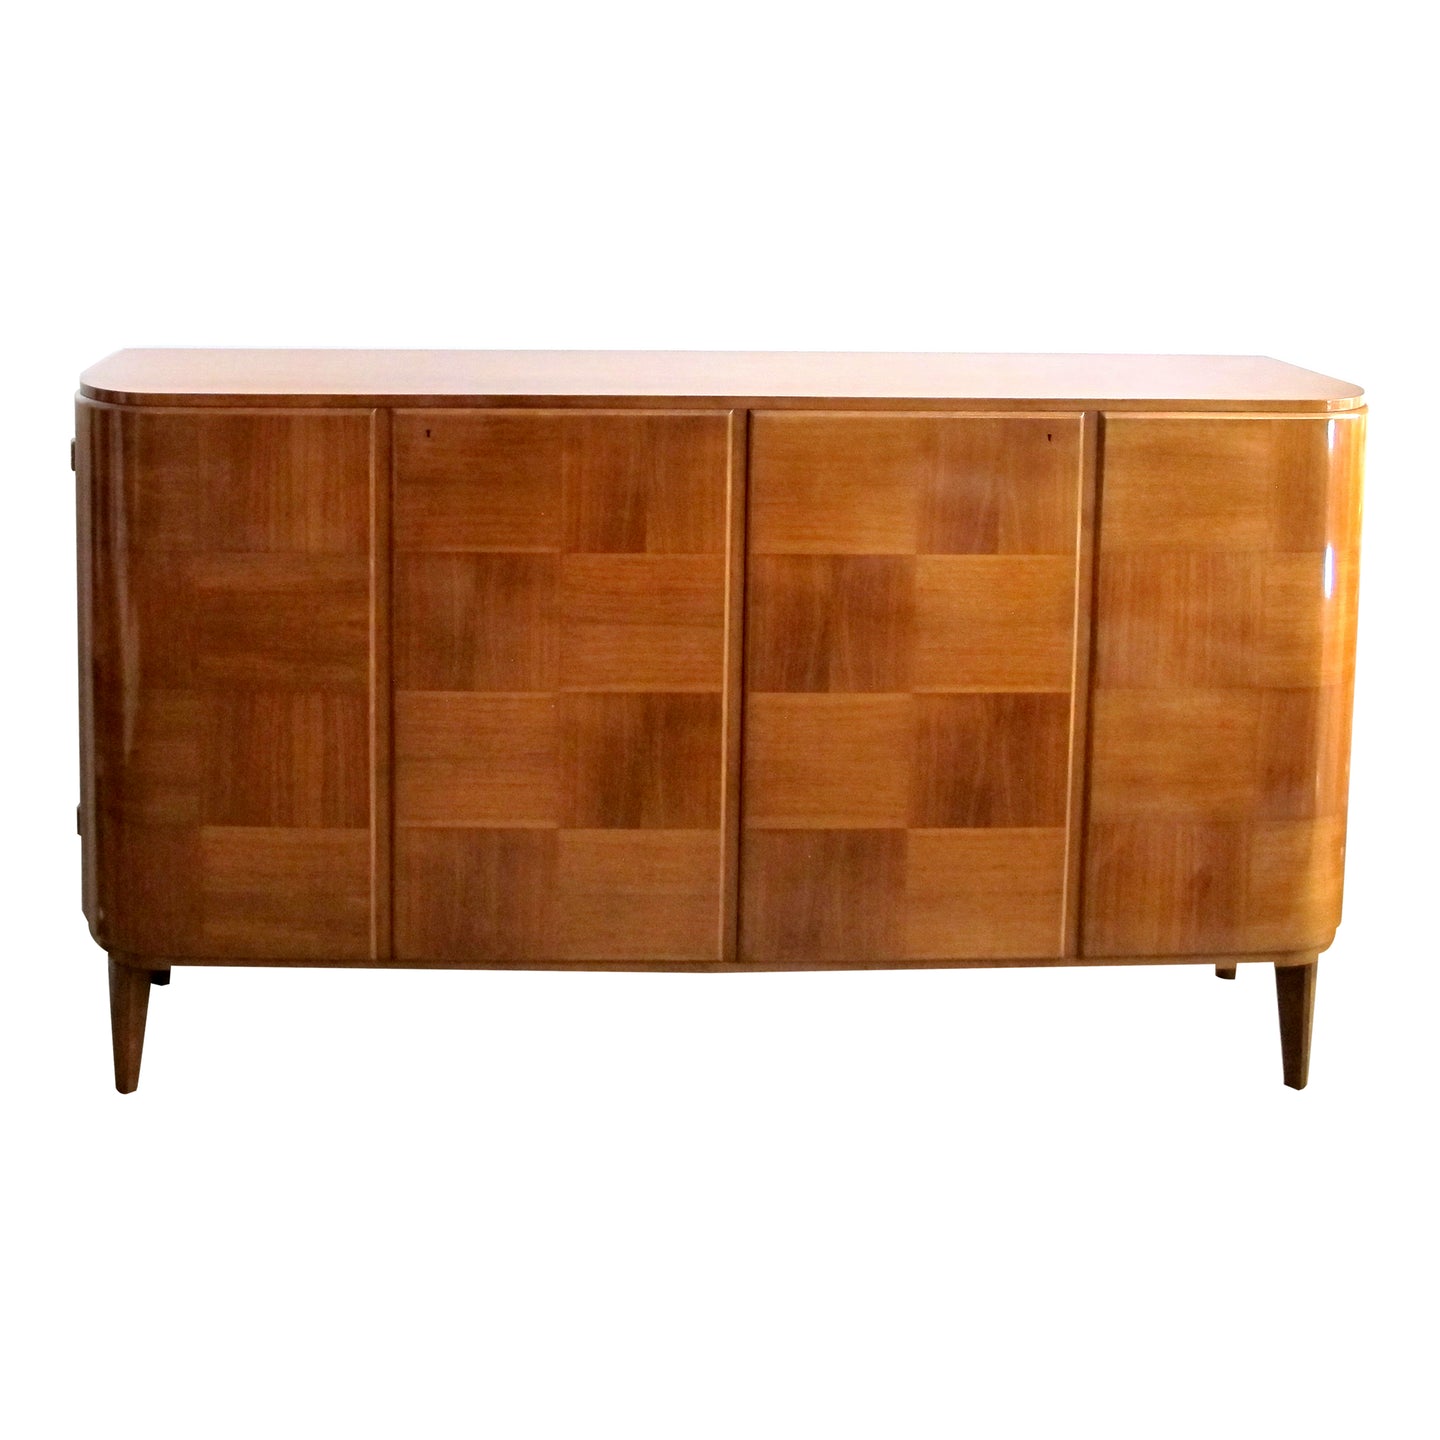 1930s/40s Art Deco Rare Sideboard with Curved edges by Carl Axel Acking for Bodafors, Swedish